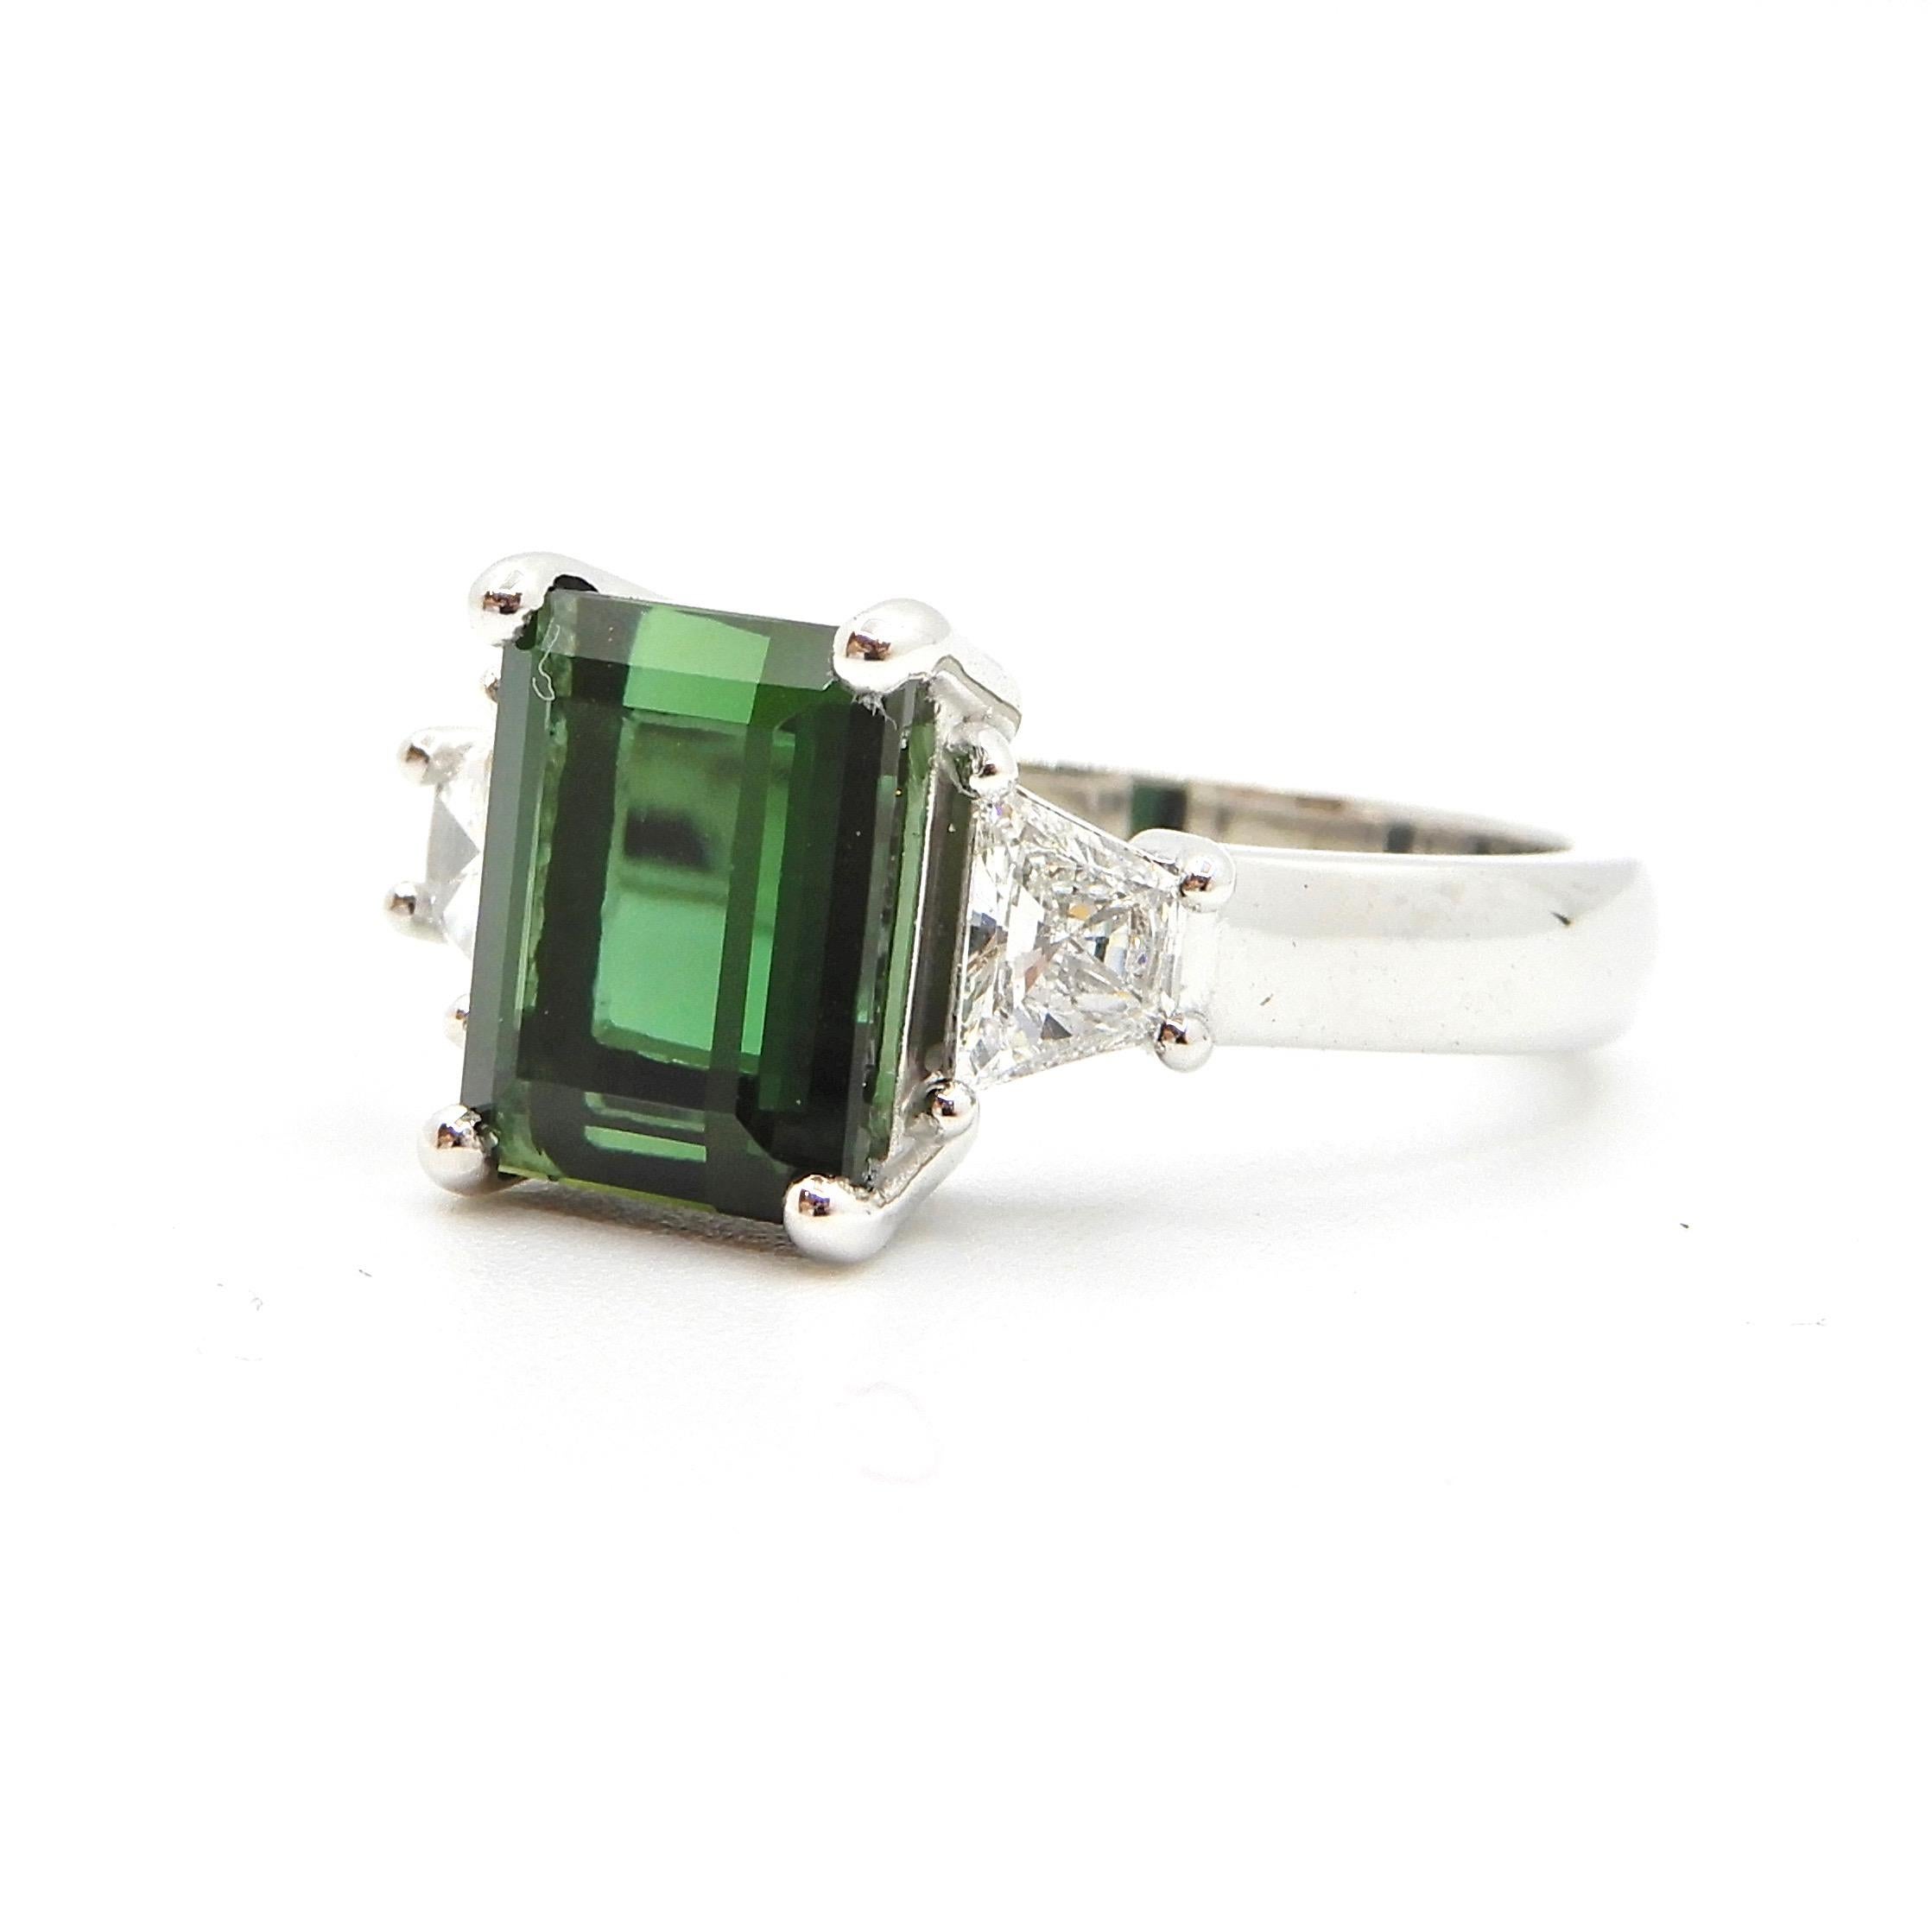 This vivid green, 2.86 Carat Green Tourmaline and Diamond Cocktail Ring is set in 18 carat Australian White Gold.  The rounded band supports a central 4 claw set, perfect shade of green, emerald cut Tourmaline.  Flanked by G SI trapezoid cut